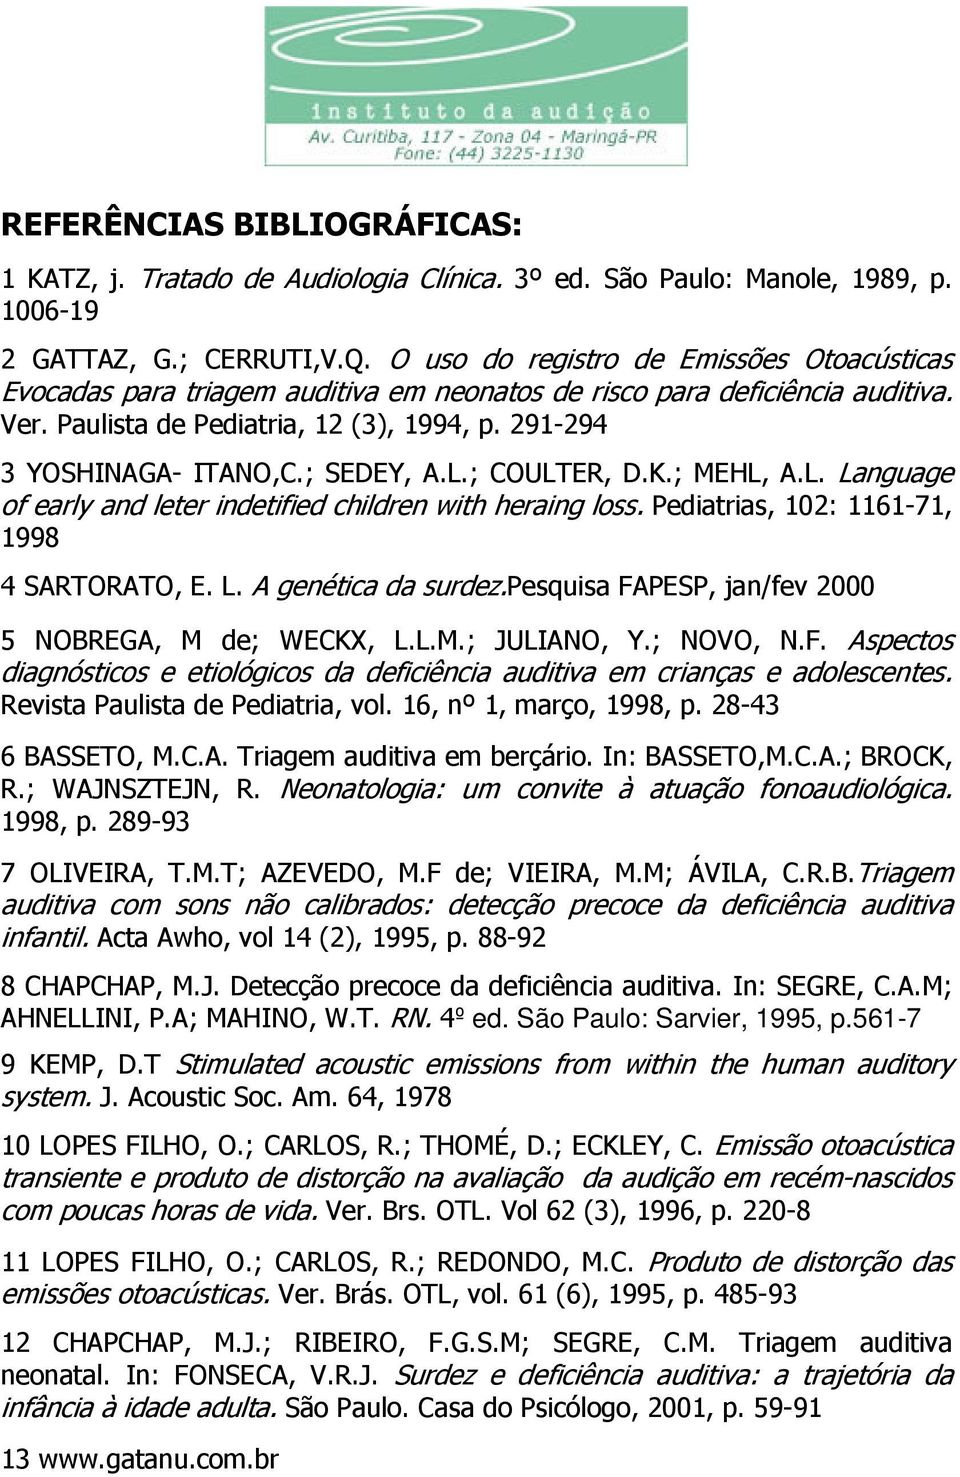 ; SEDEY, A.L.; COULTER, D.K.; MEHL, A.L. Language of early and leter indetified children with heraing loss. Pediatrias, 102: 1161-71, 1998 4 SARTORATO, E. L. A genética da surdez.